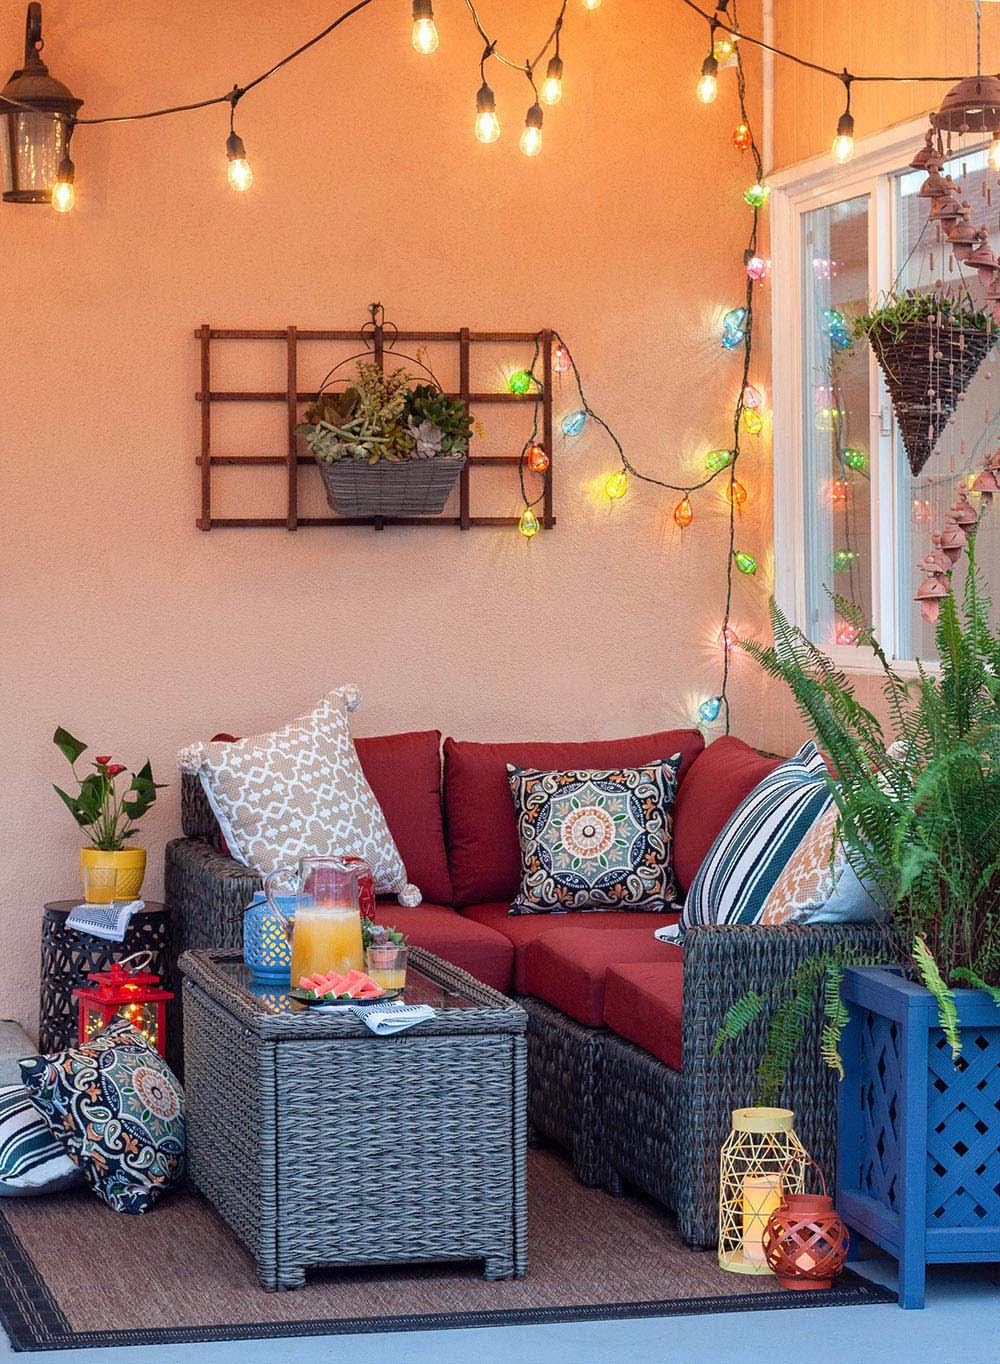 An outdoor patio decorated in bright colors with colorful string lights.